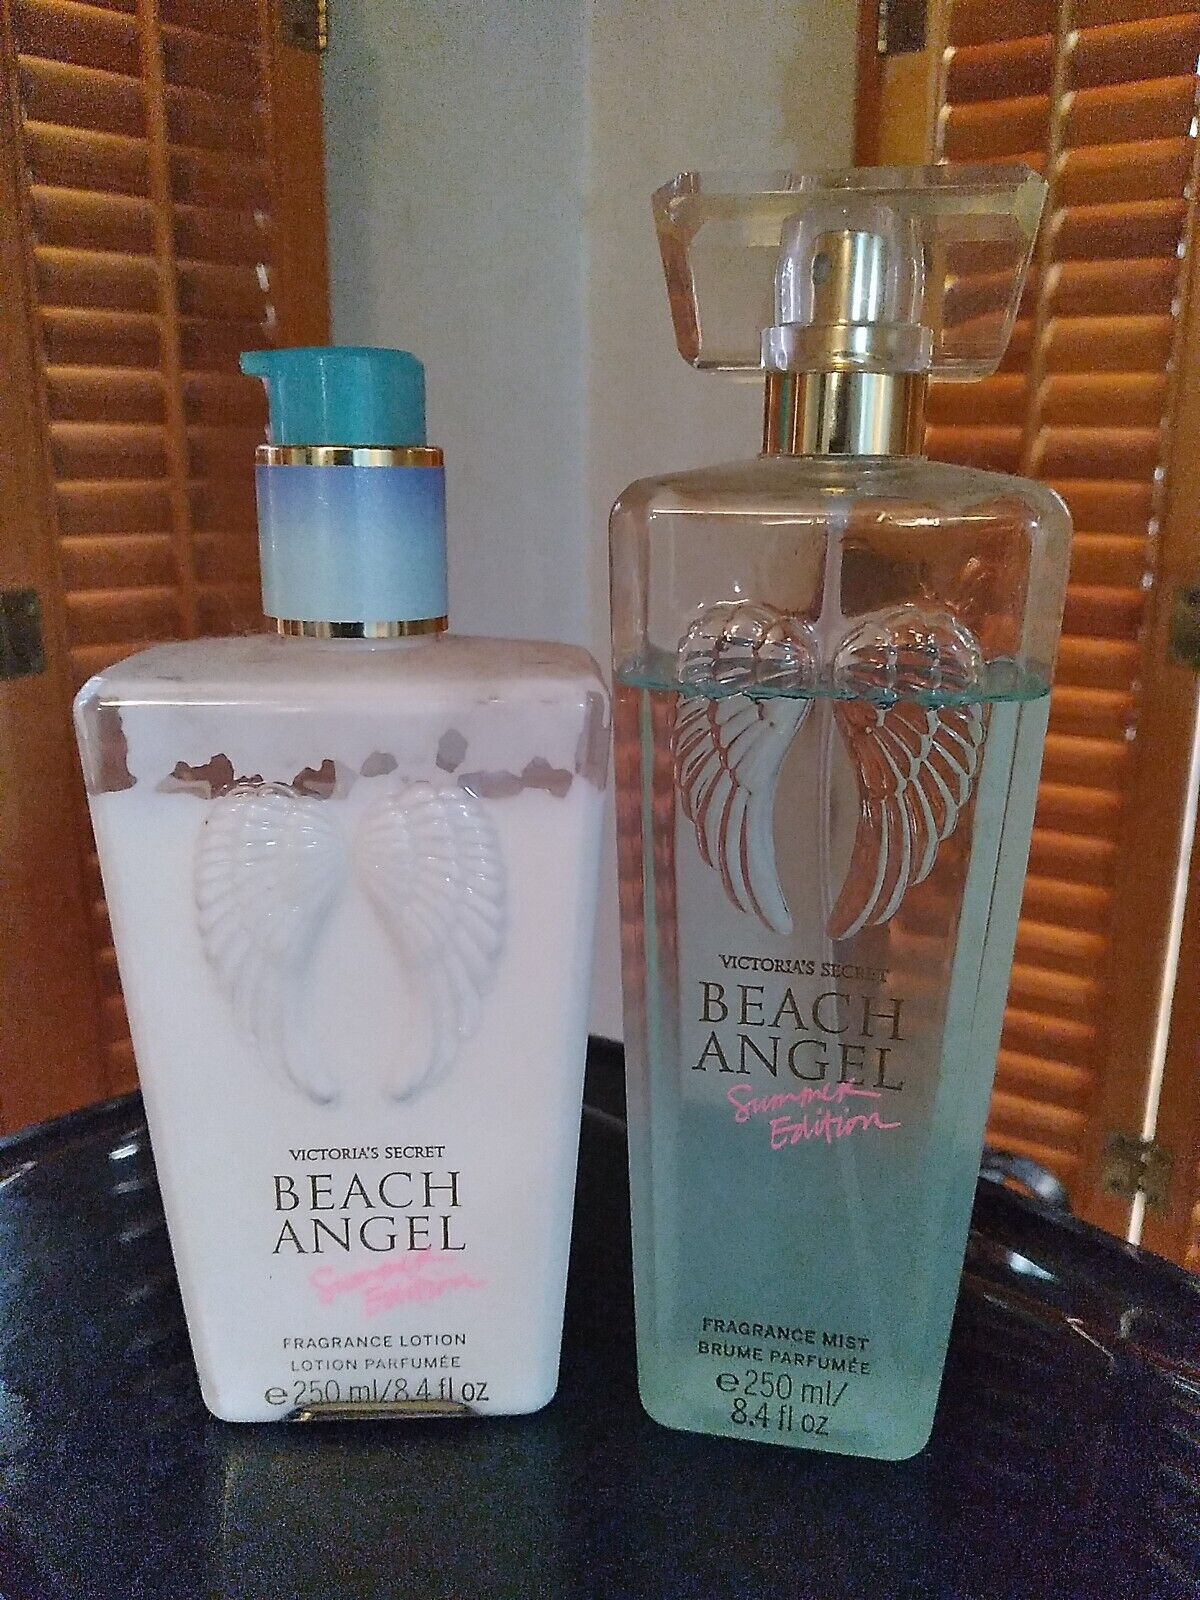 VS BEACH ANGEL SUMMER EDITION FRAGRANCE MIST AND LOTION 85% remains